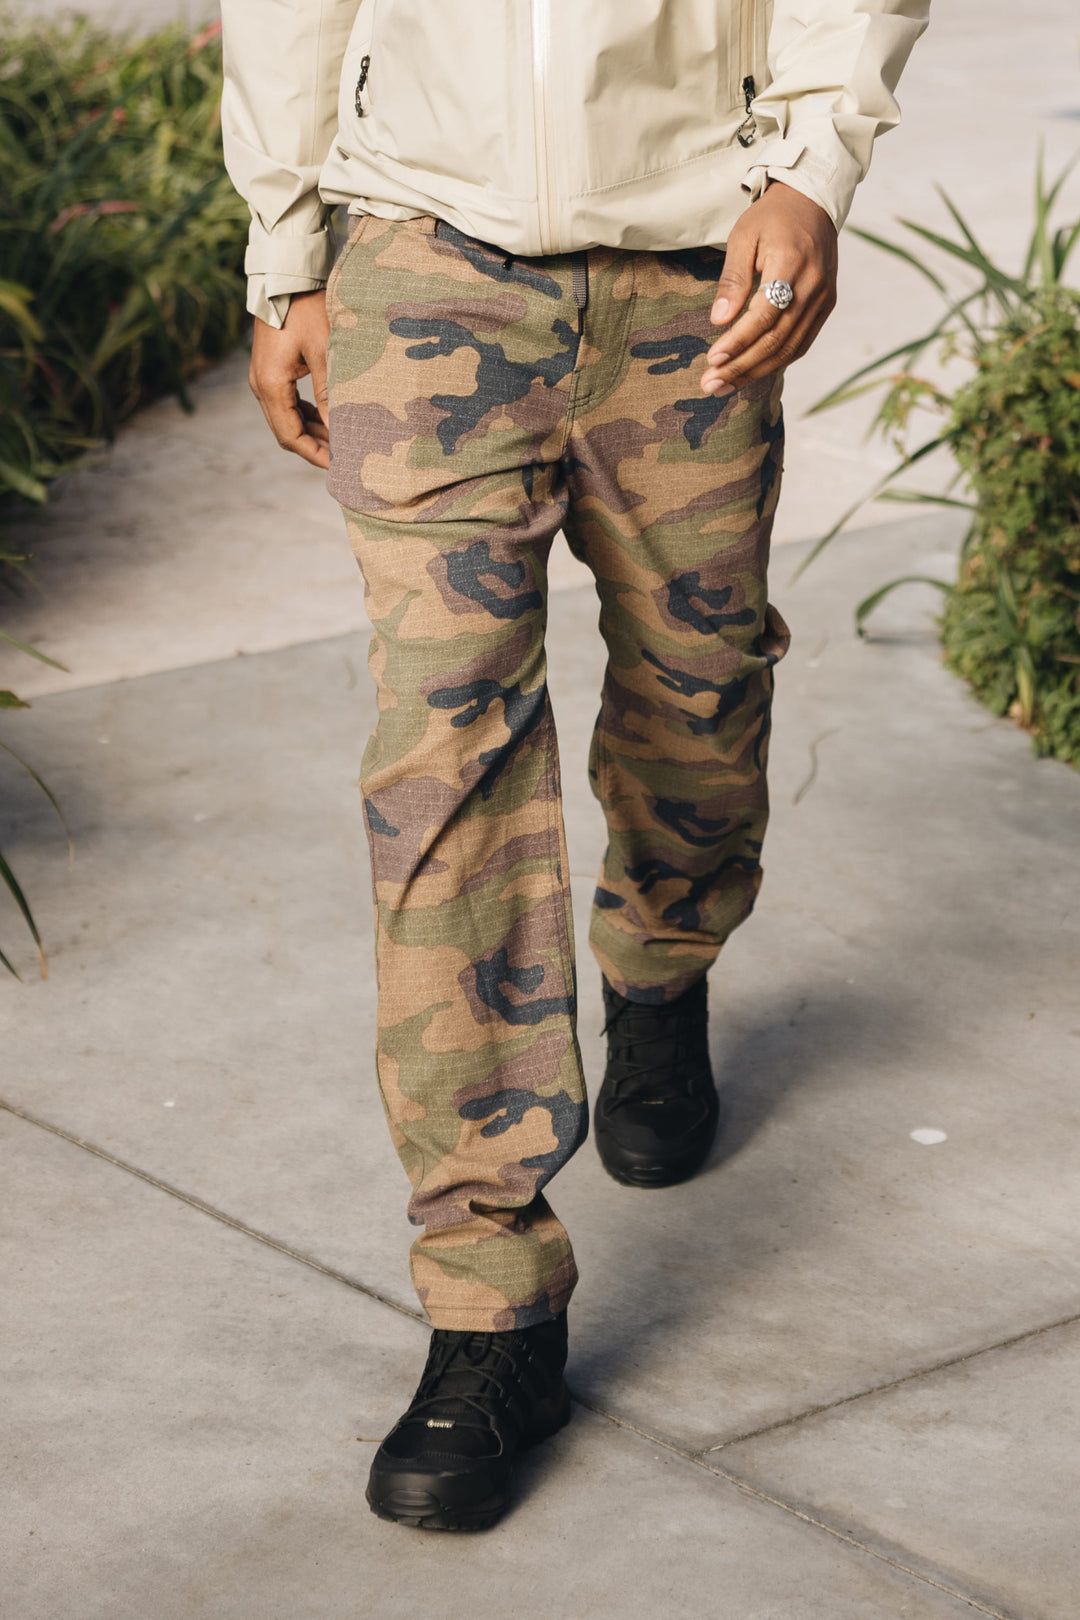 686 EVERYWHERE PANT - RELAXED FIT - DARK CAMO - Sun Diego Boardshop